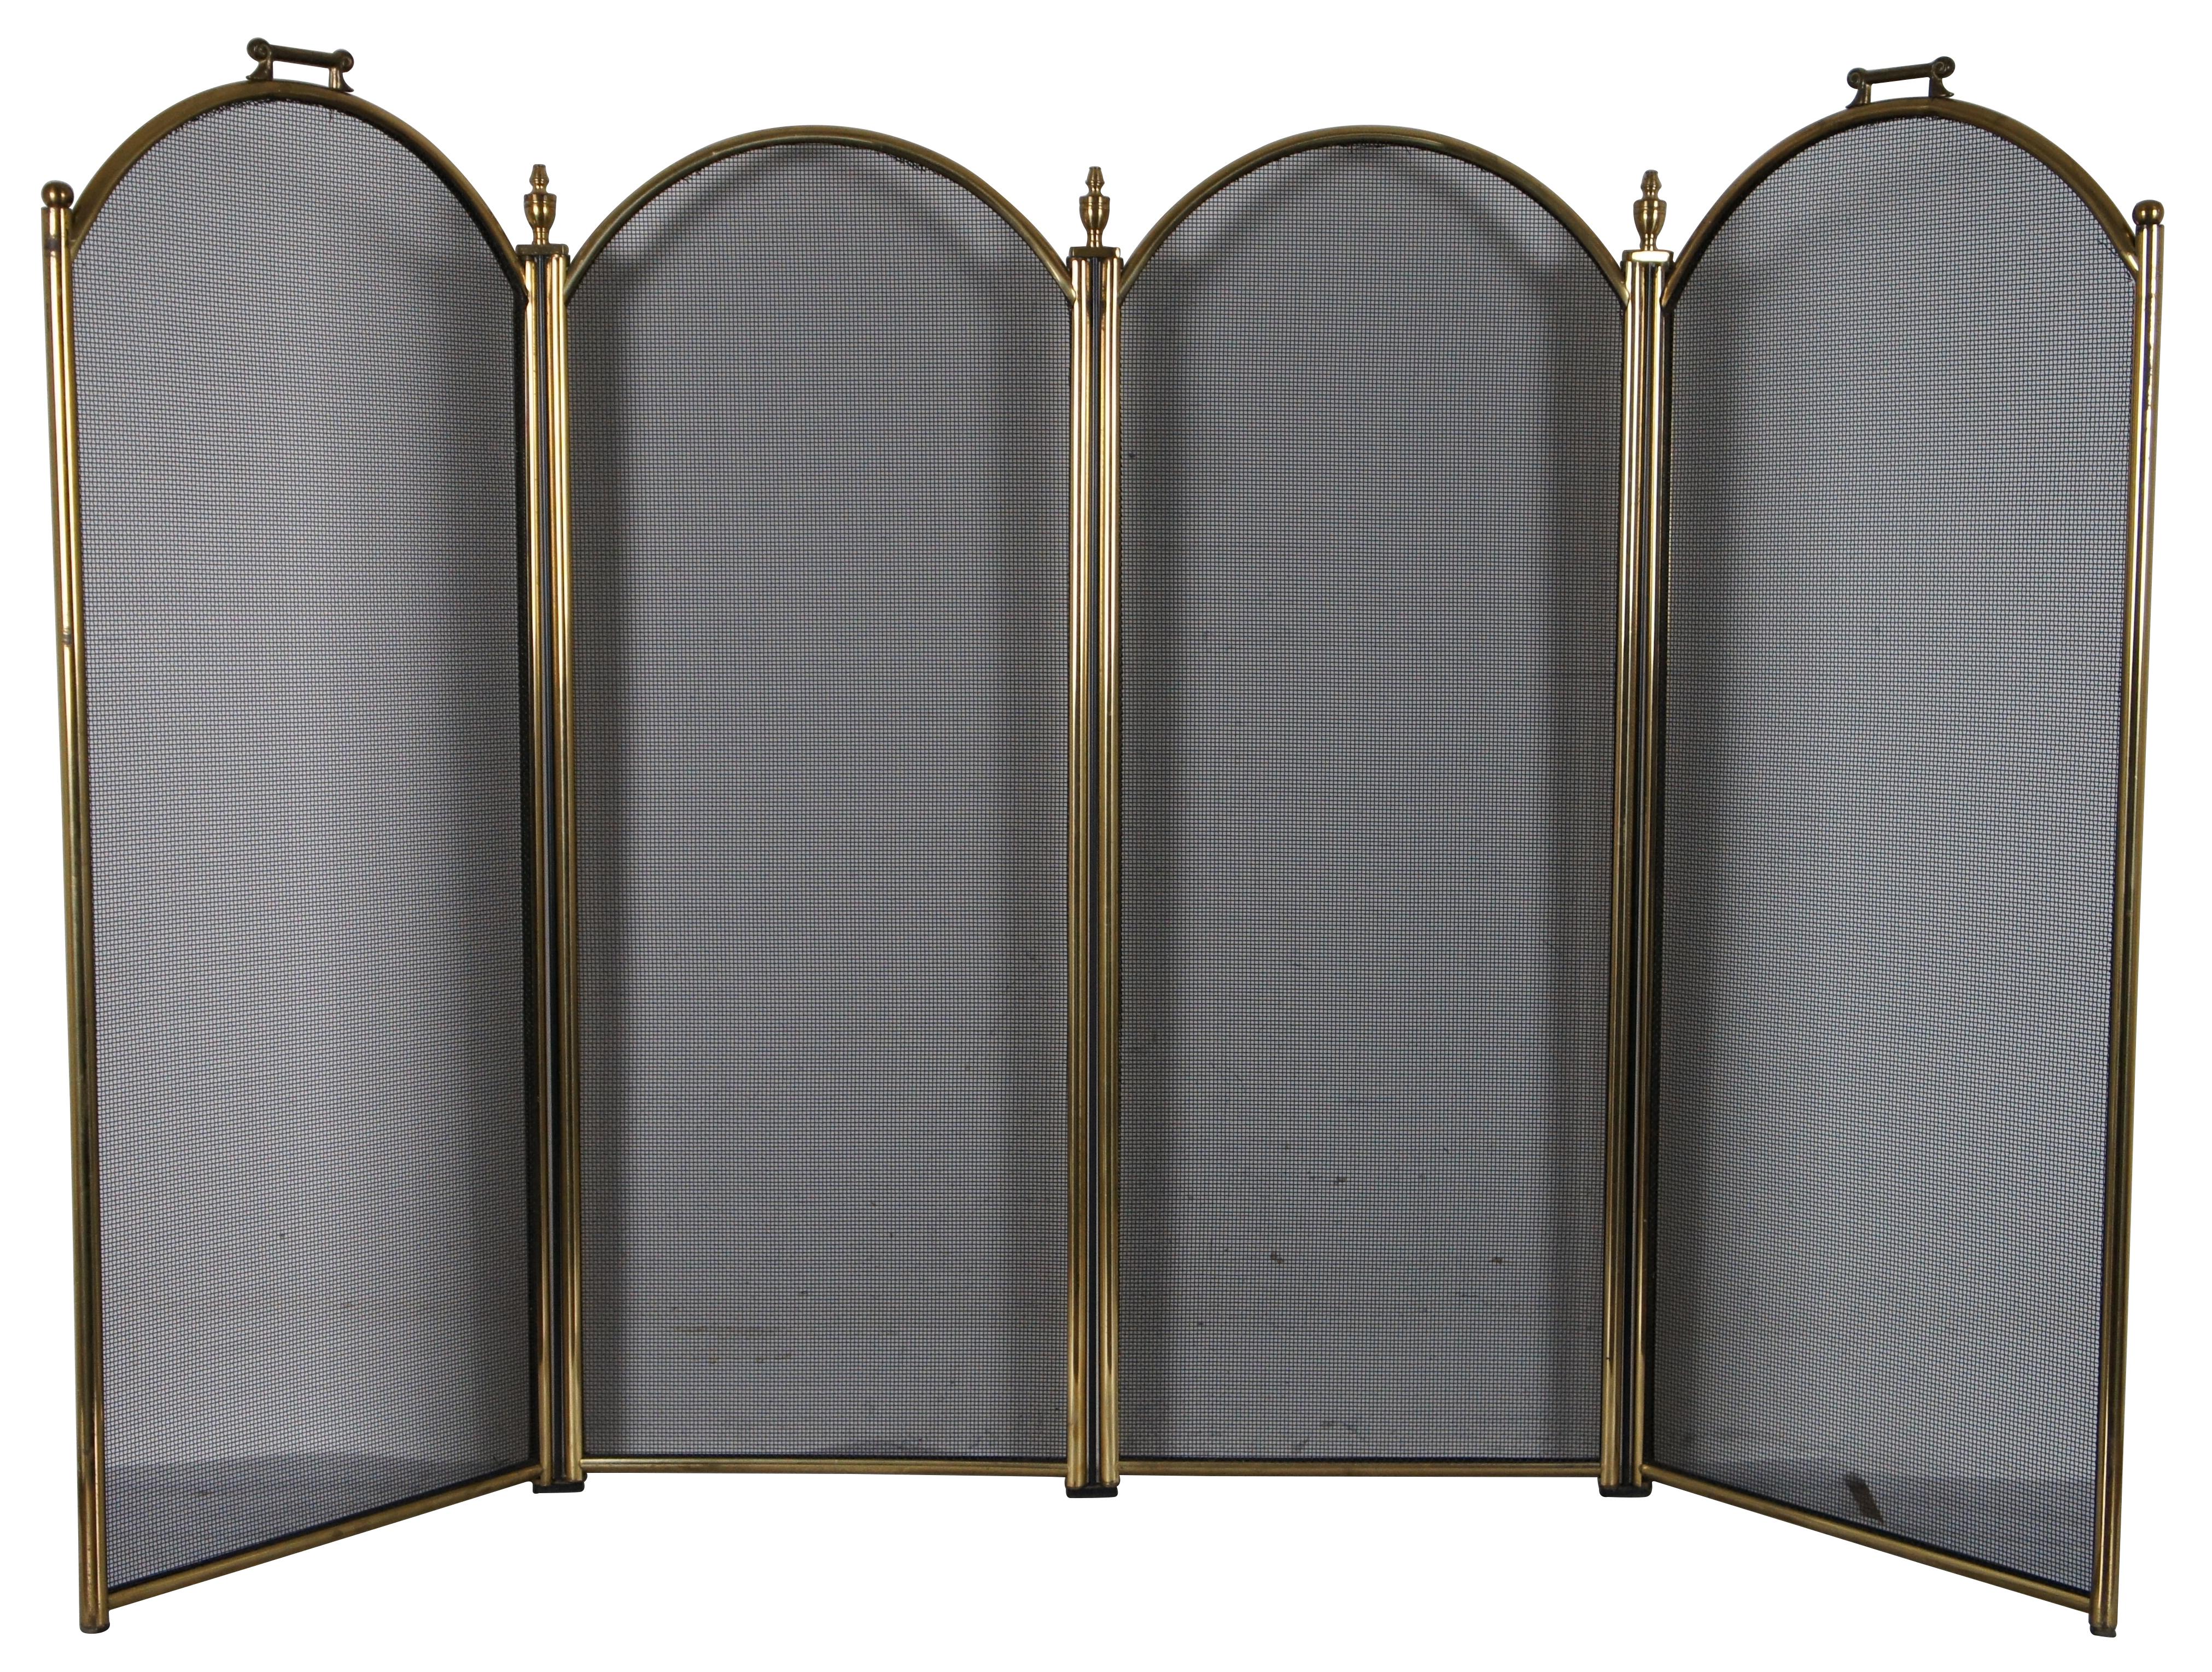 Vintage four panel polished brass and wire mesh fireplace screen featuring arched tops, turned urn shaped finials, and square handles. 18th century design. Mesaure: 35